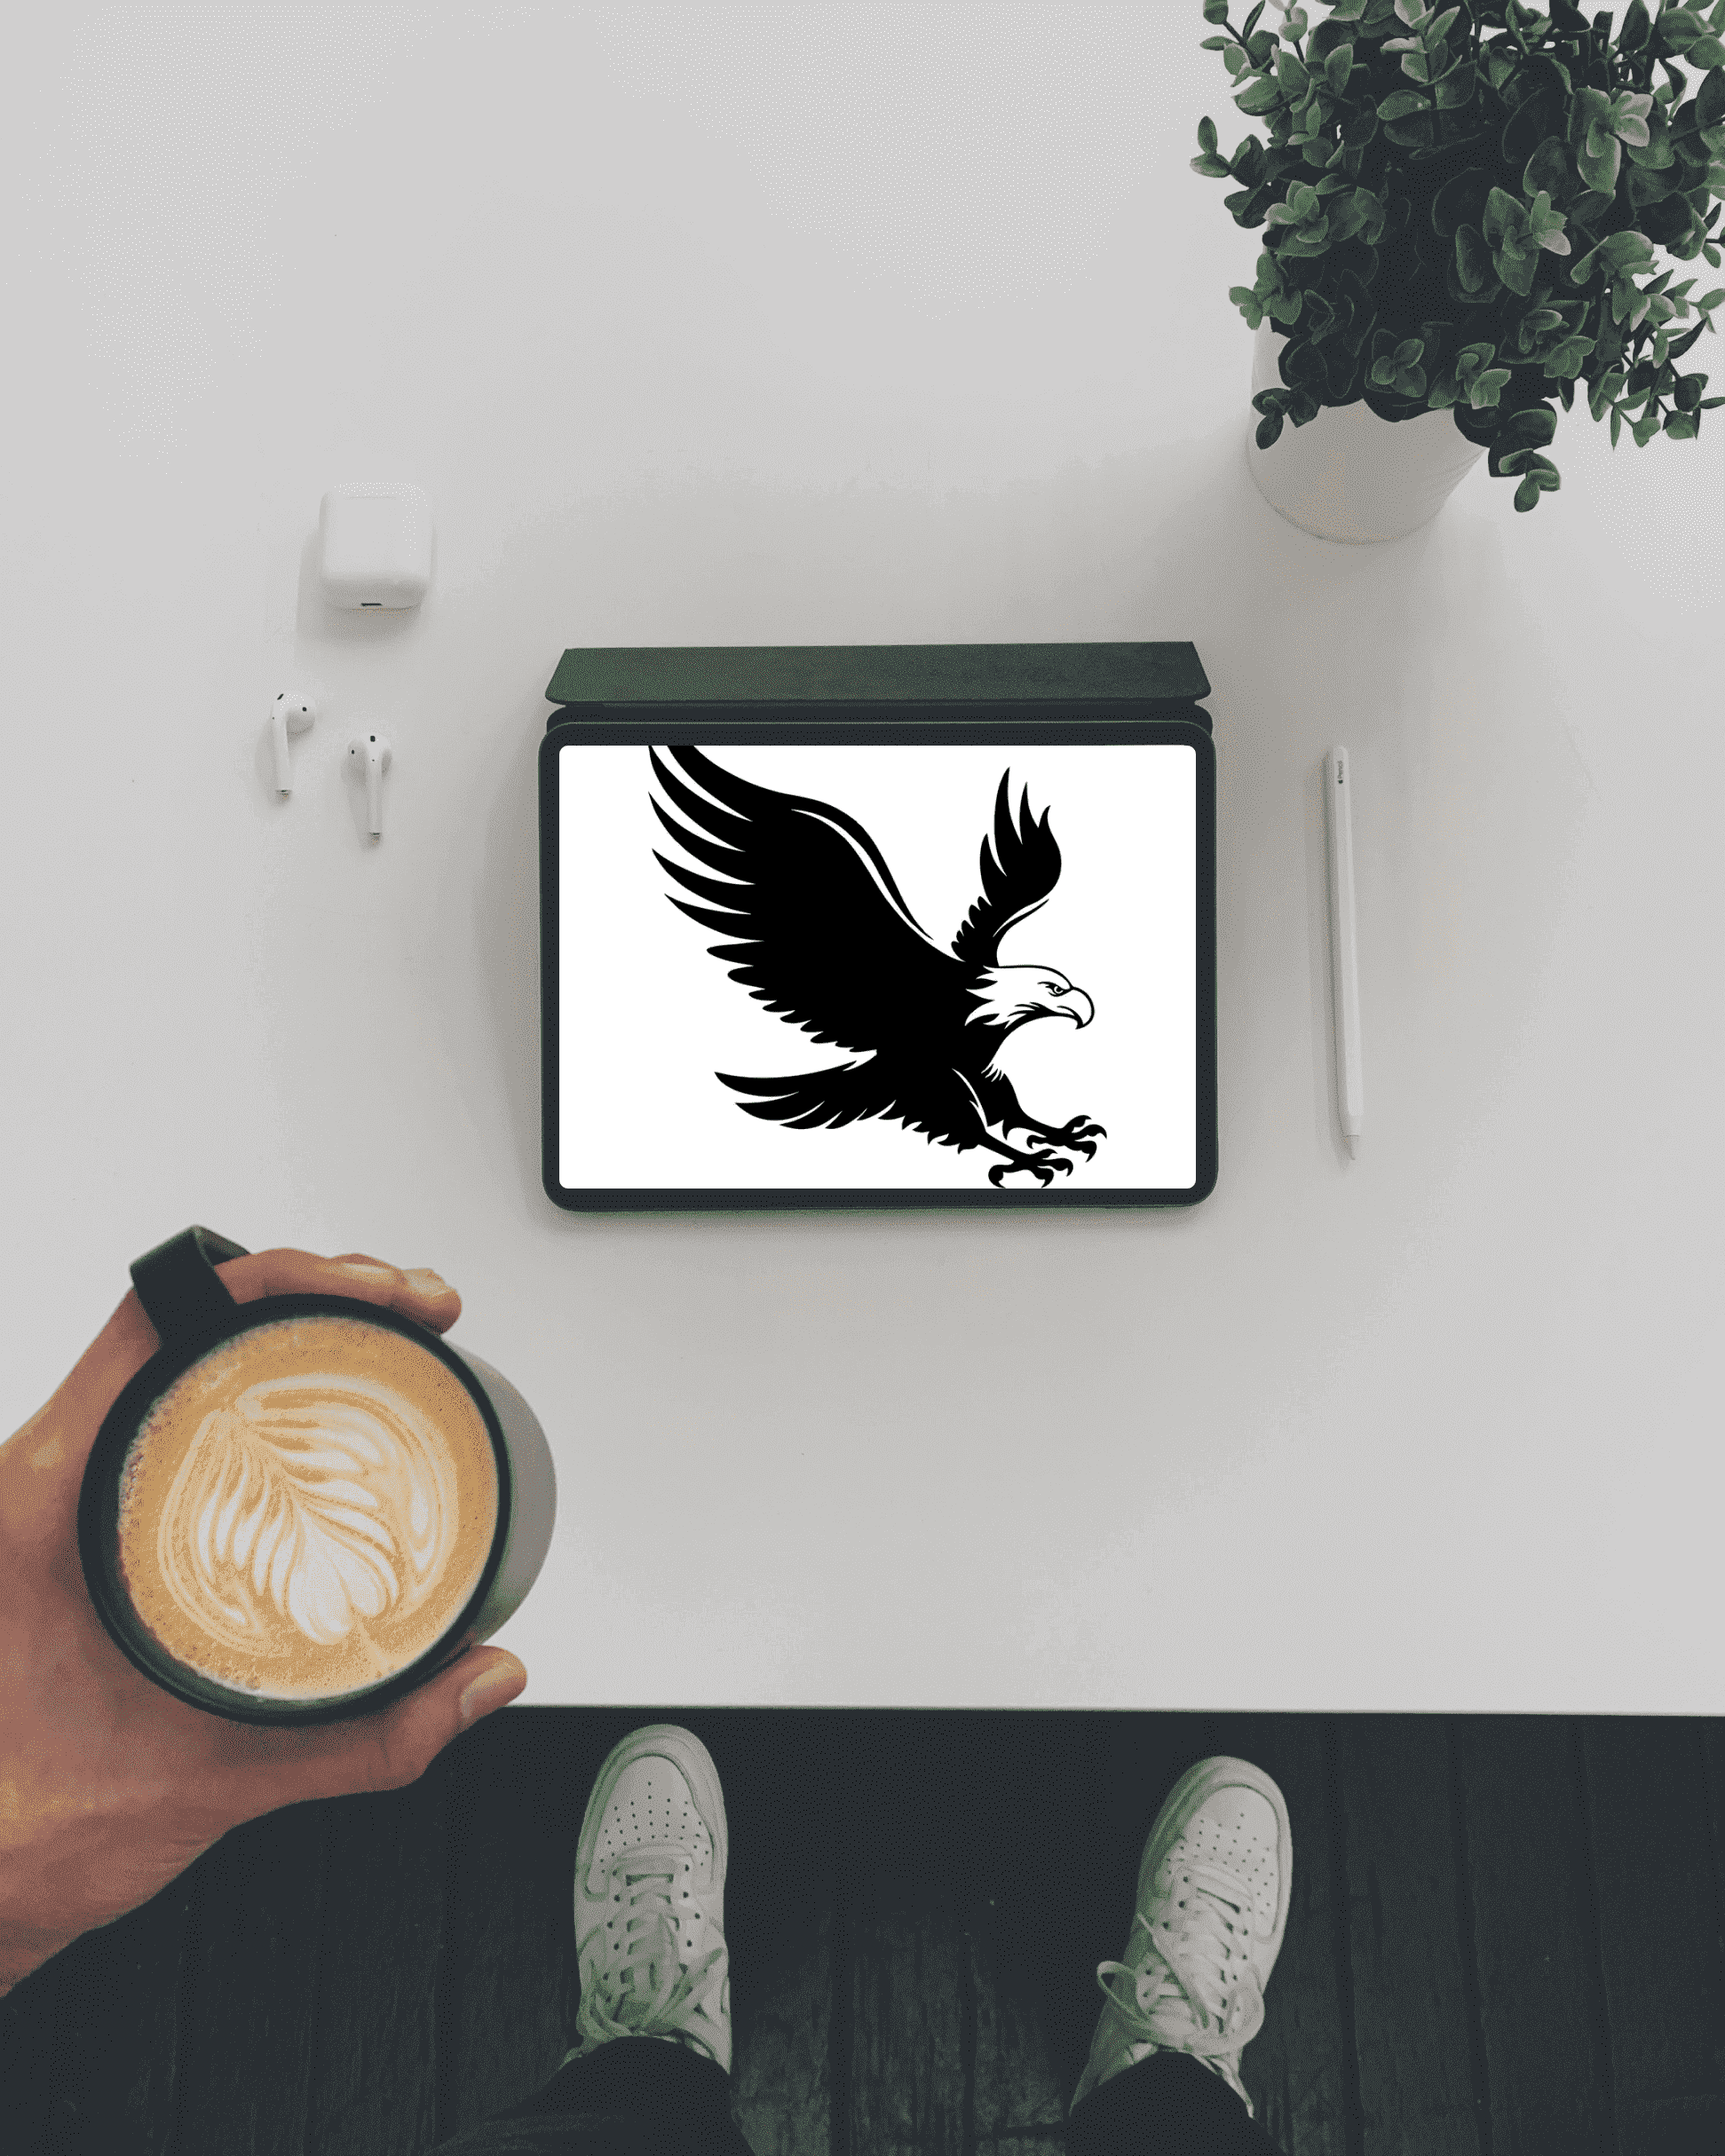 Person holding a cup of coffee in front of a picture of an eagle.